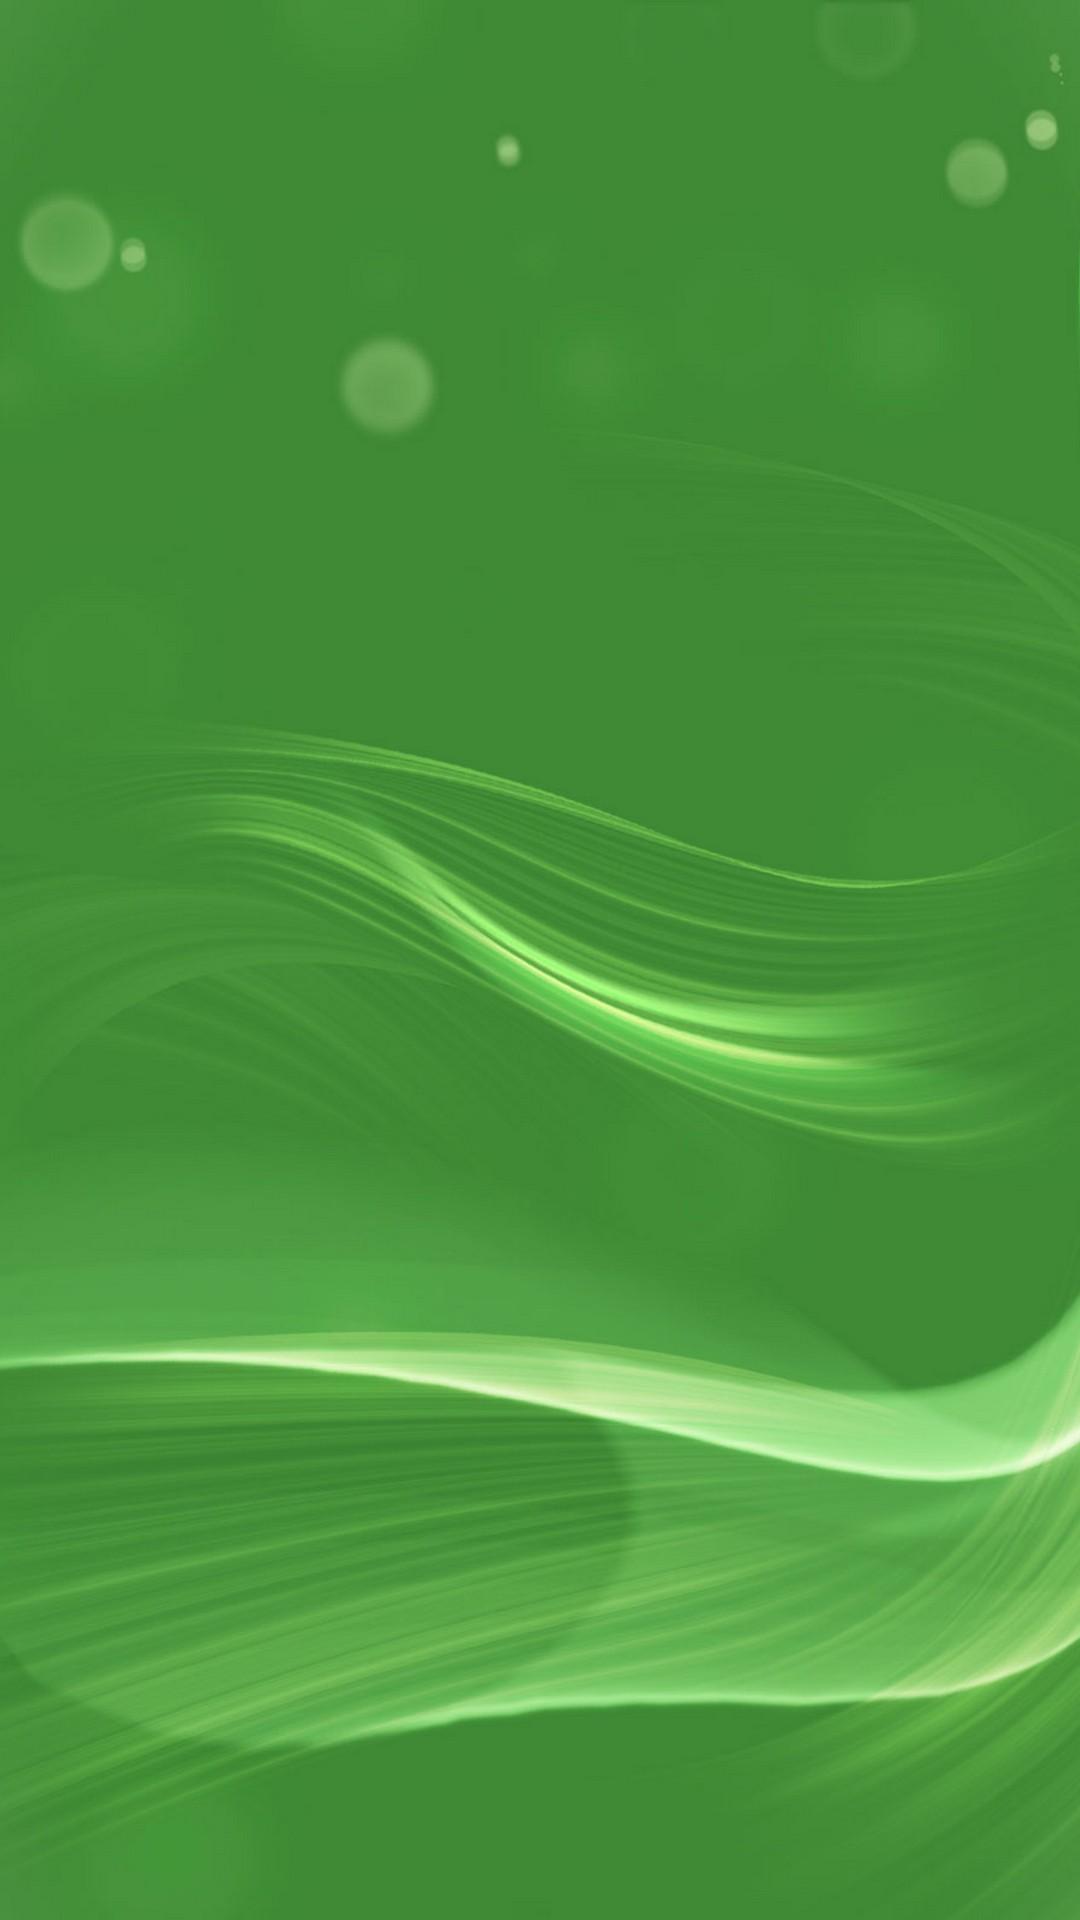 Green Colour Wallpaper, image collections of wallpaper